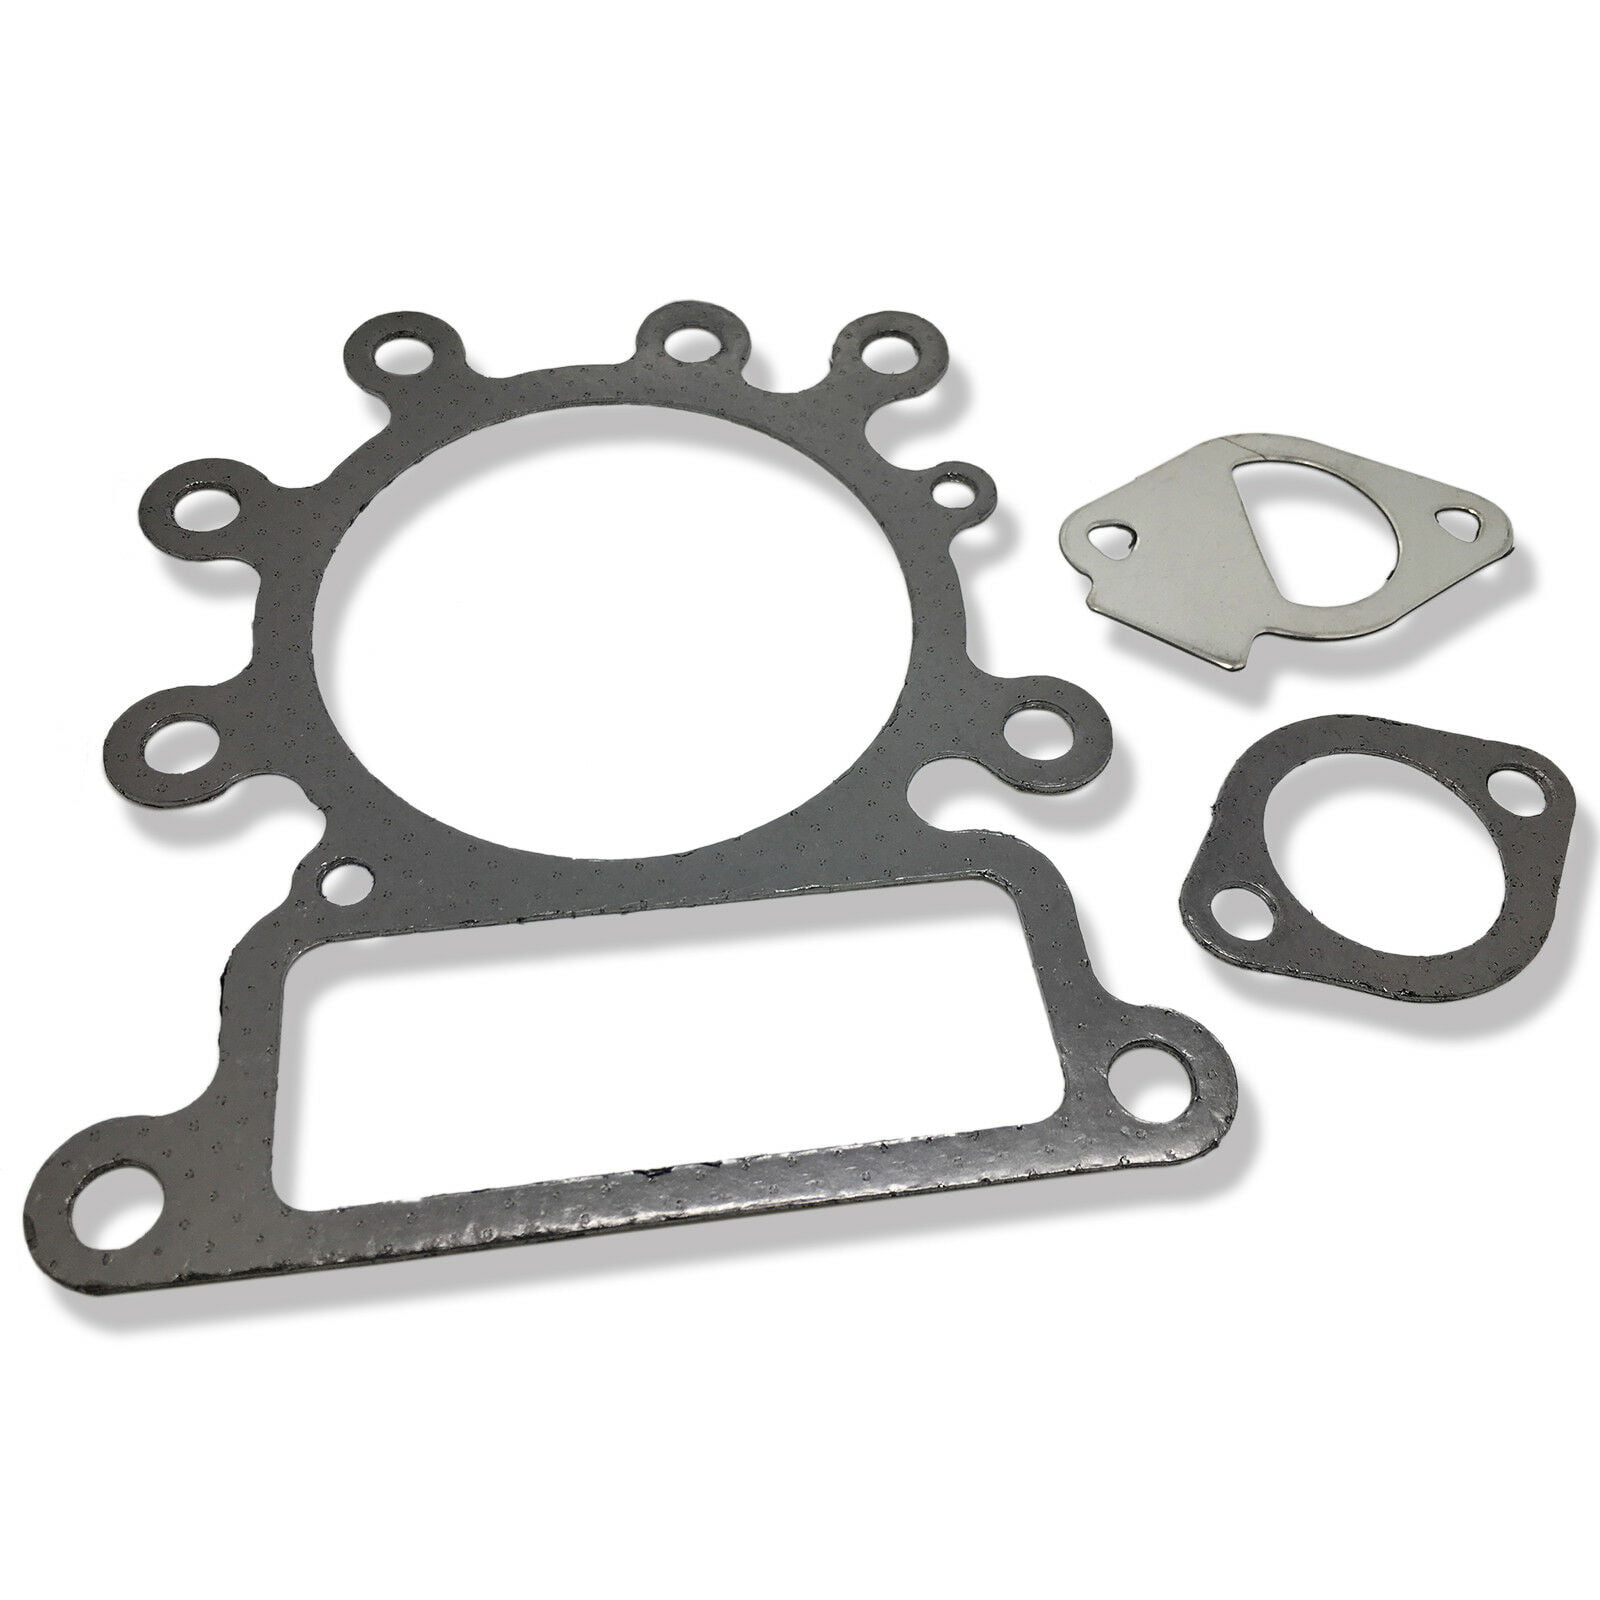 69719 CA Engine Gasket Set For Briggs&Stratton 796187  Replaces #794150 792621 